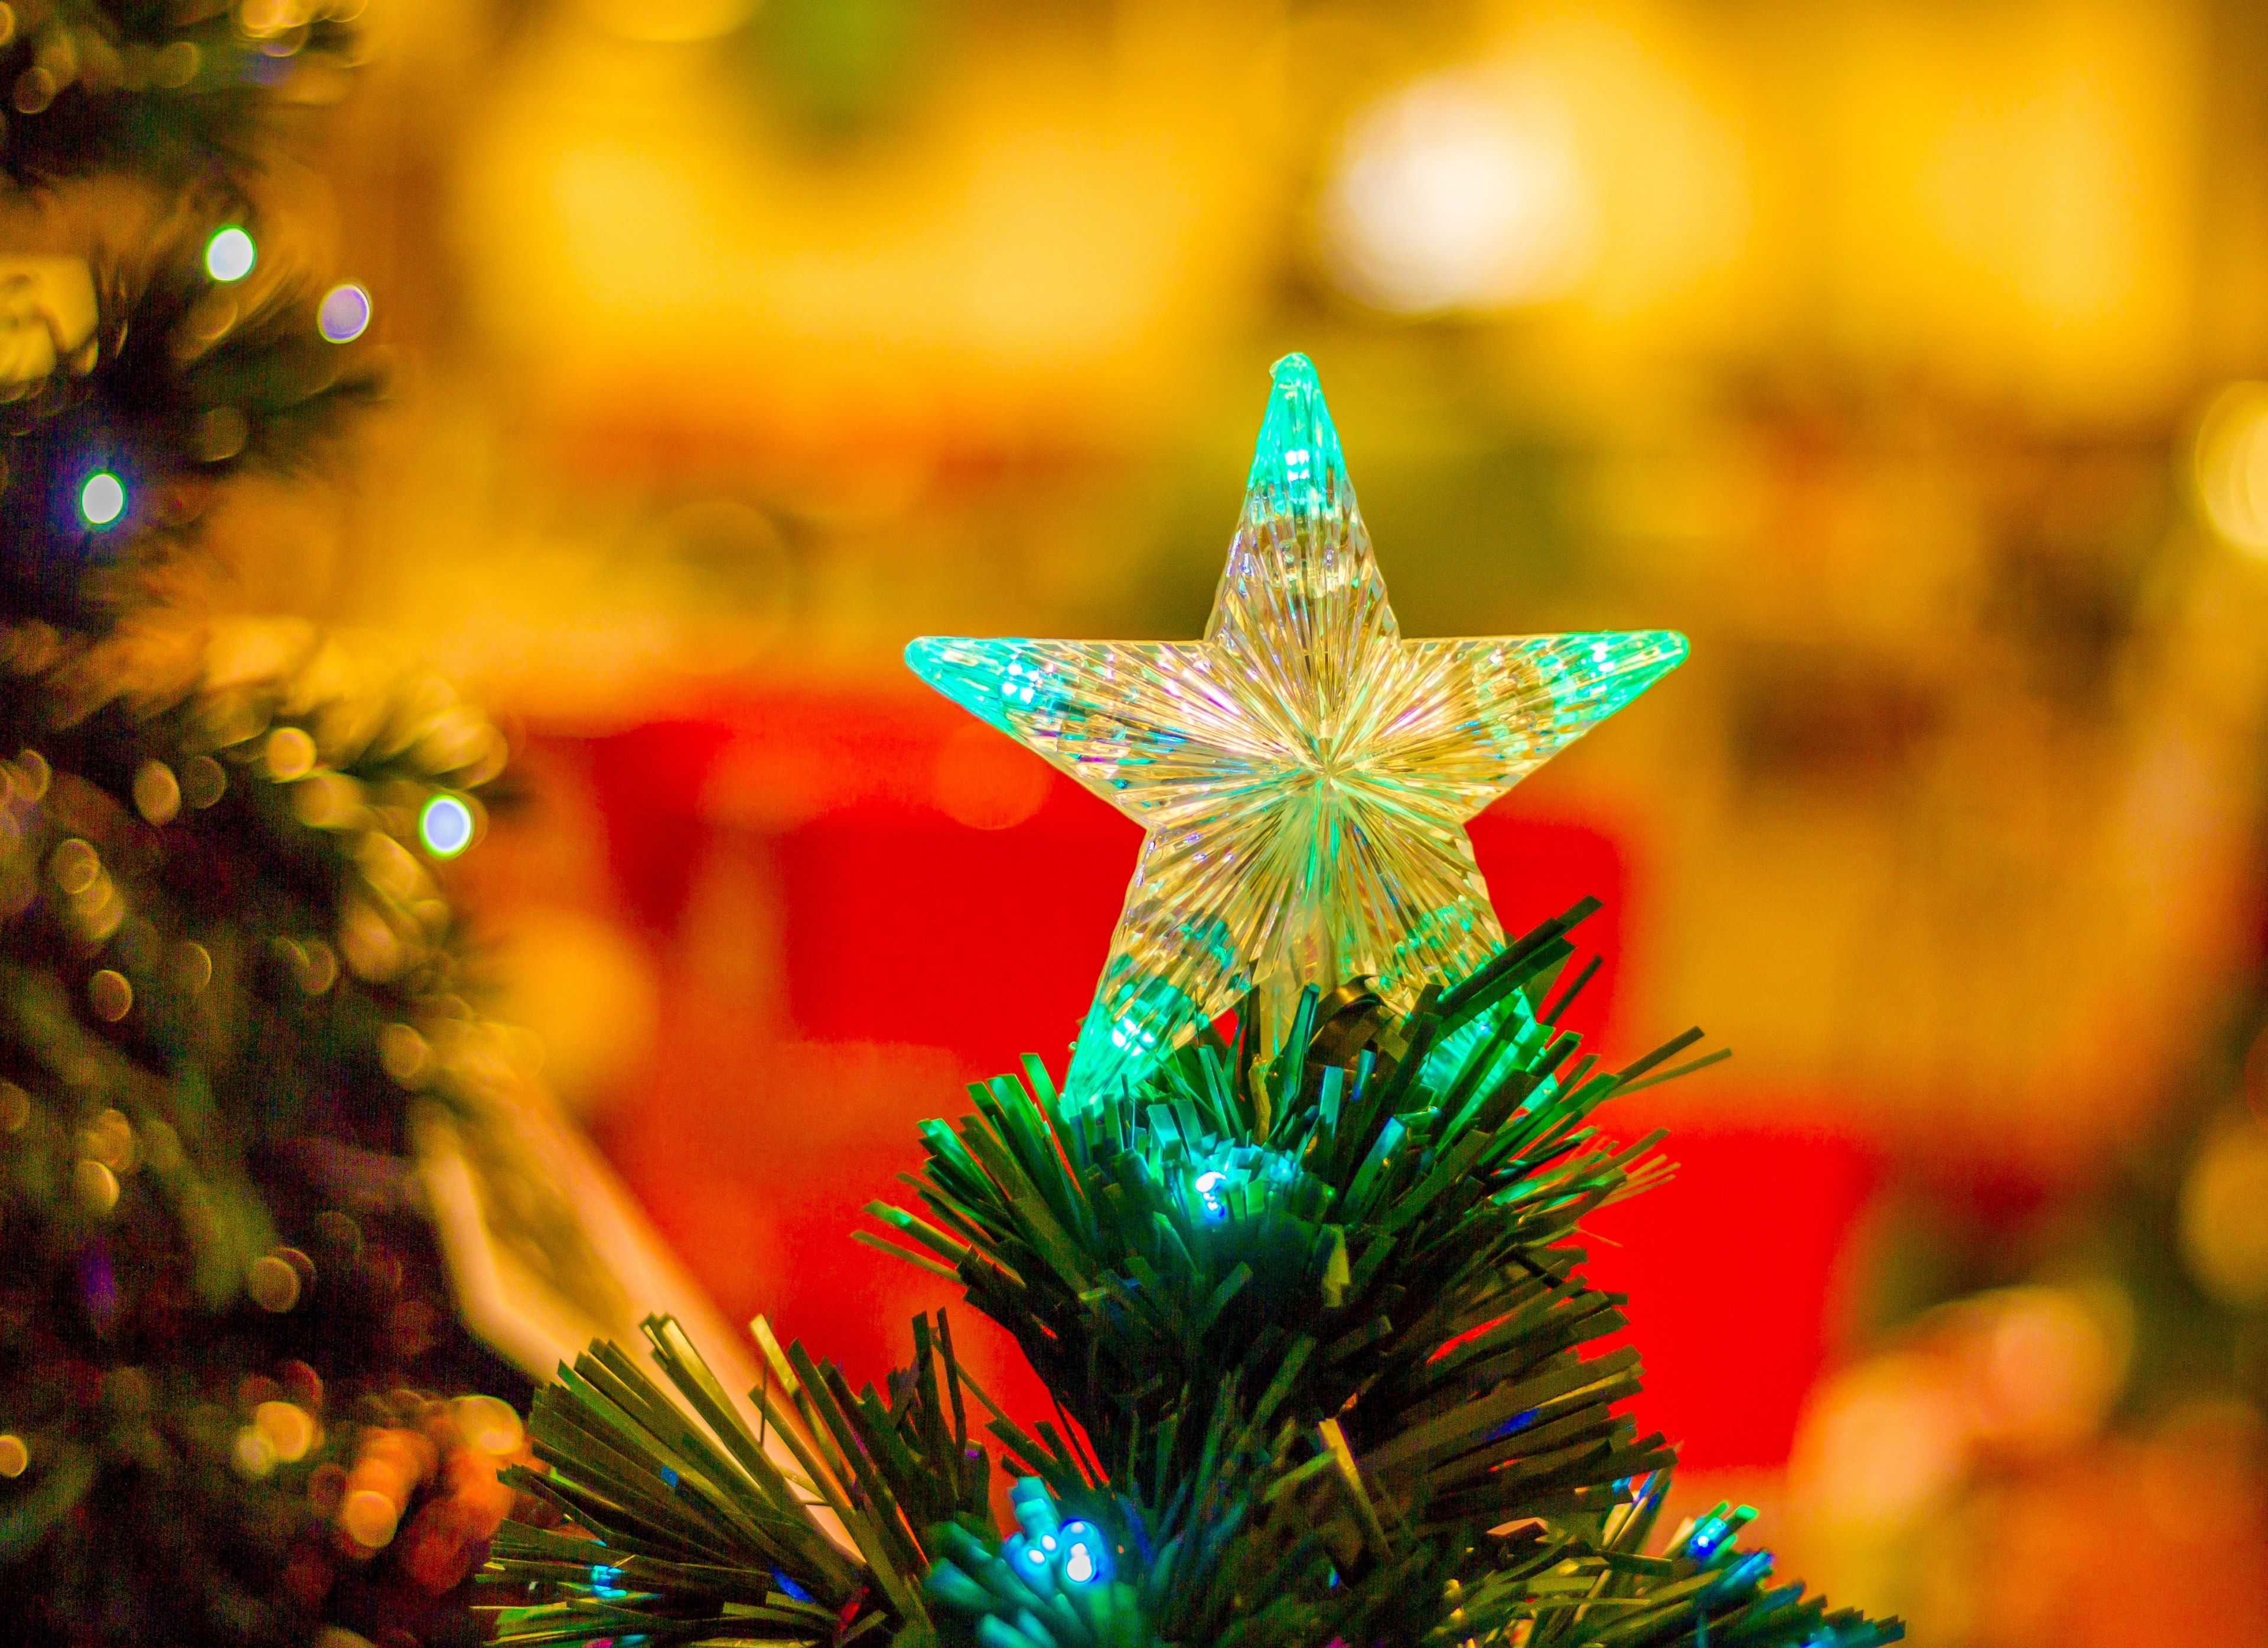 Wallpapers ID: 245354 / christmas decorations 4k wallpapers